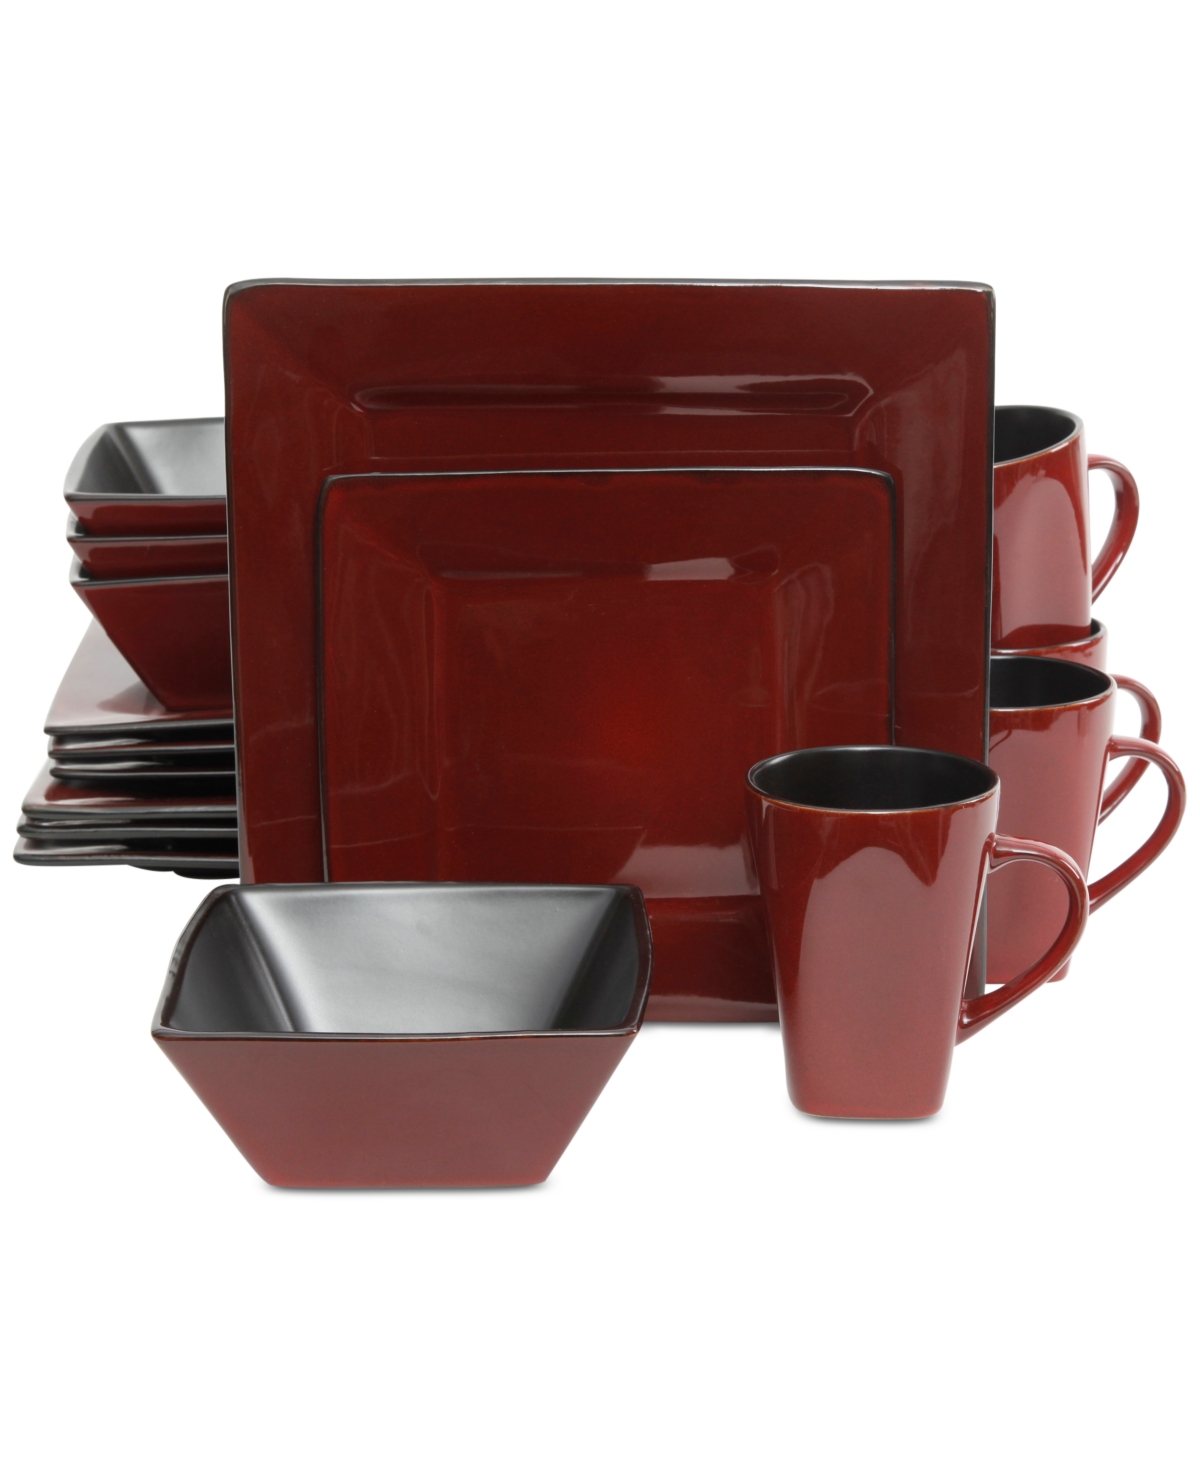 Elite Kiesling Square Red 16-Piece Dinnerware Set, Service for 4 - Red